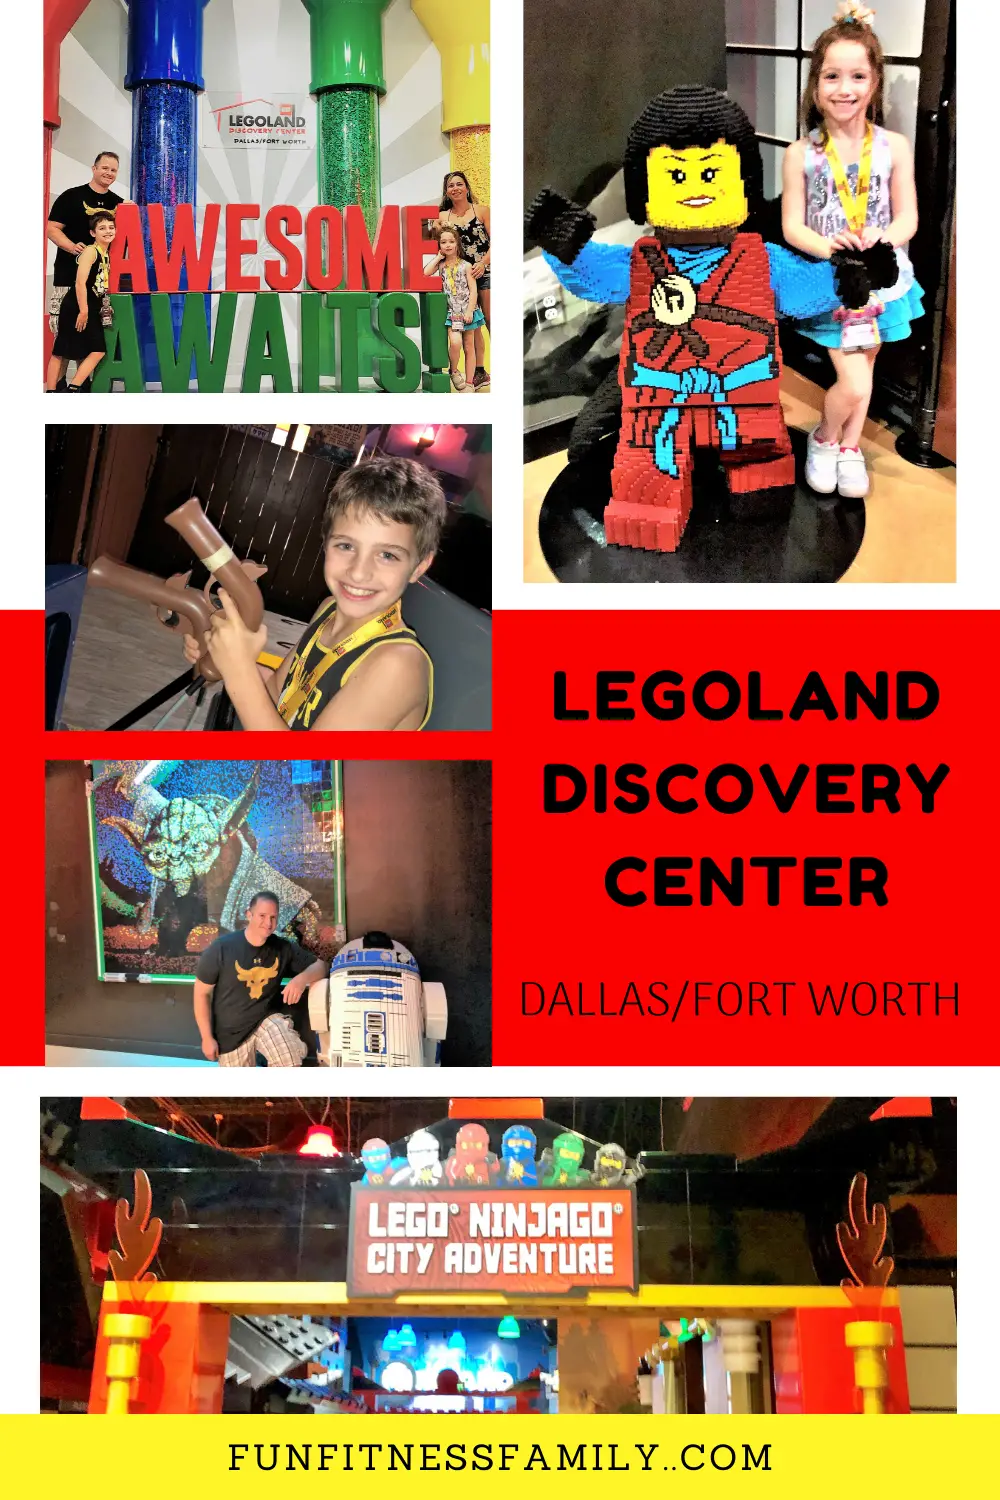 LEGOLAND Discovery Center Dallas/Fort Worth is one of the most fun things to do in Grapevine Texas with kids. This indoor mini theme park includes three rides, a water play area, a 4-D theatre, and plenty of hands-on LEGO fun! #Dallas #Texas #TravelwithKids #FamilyTravel